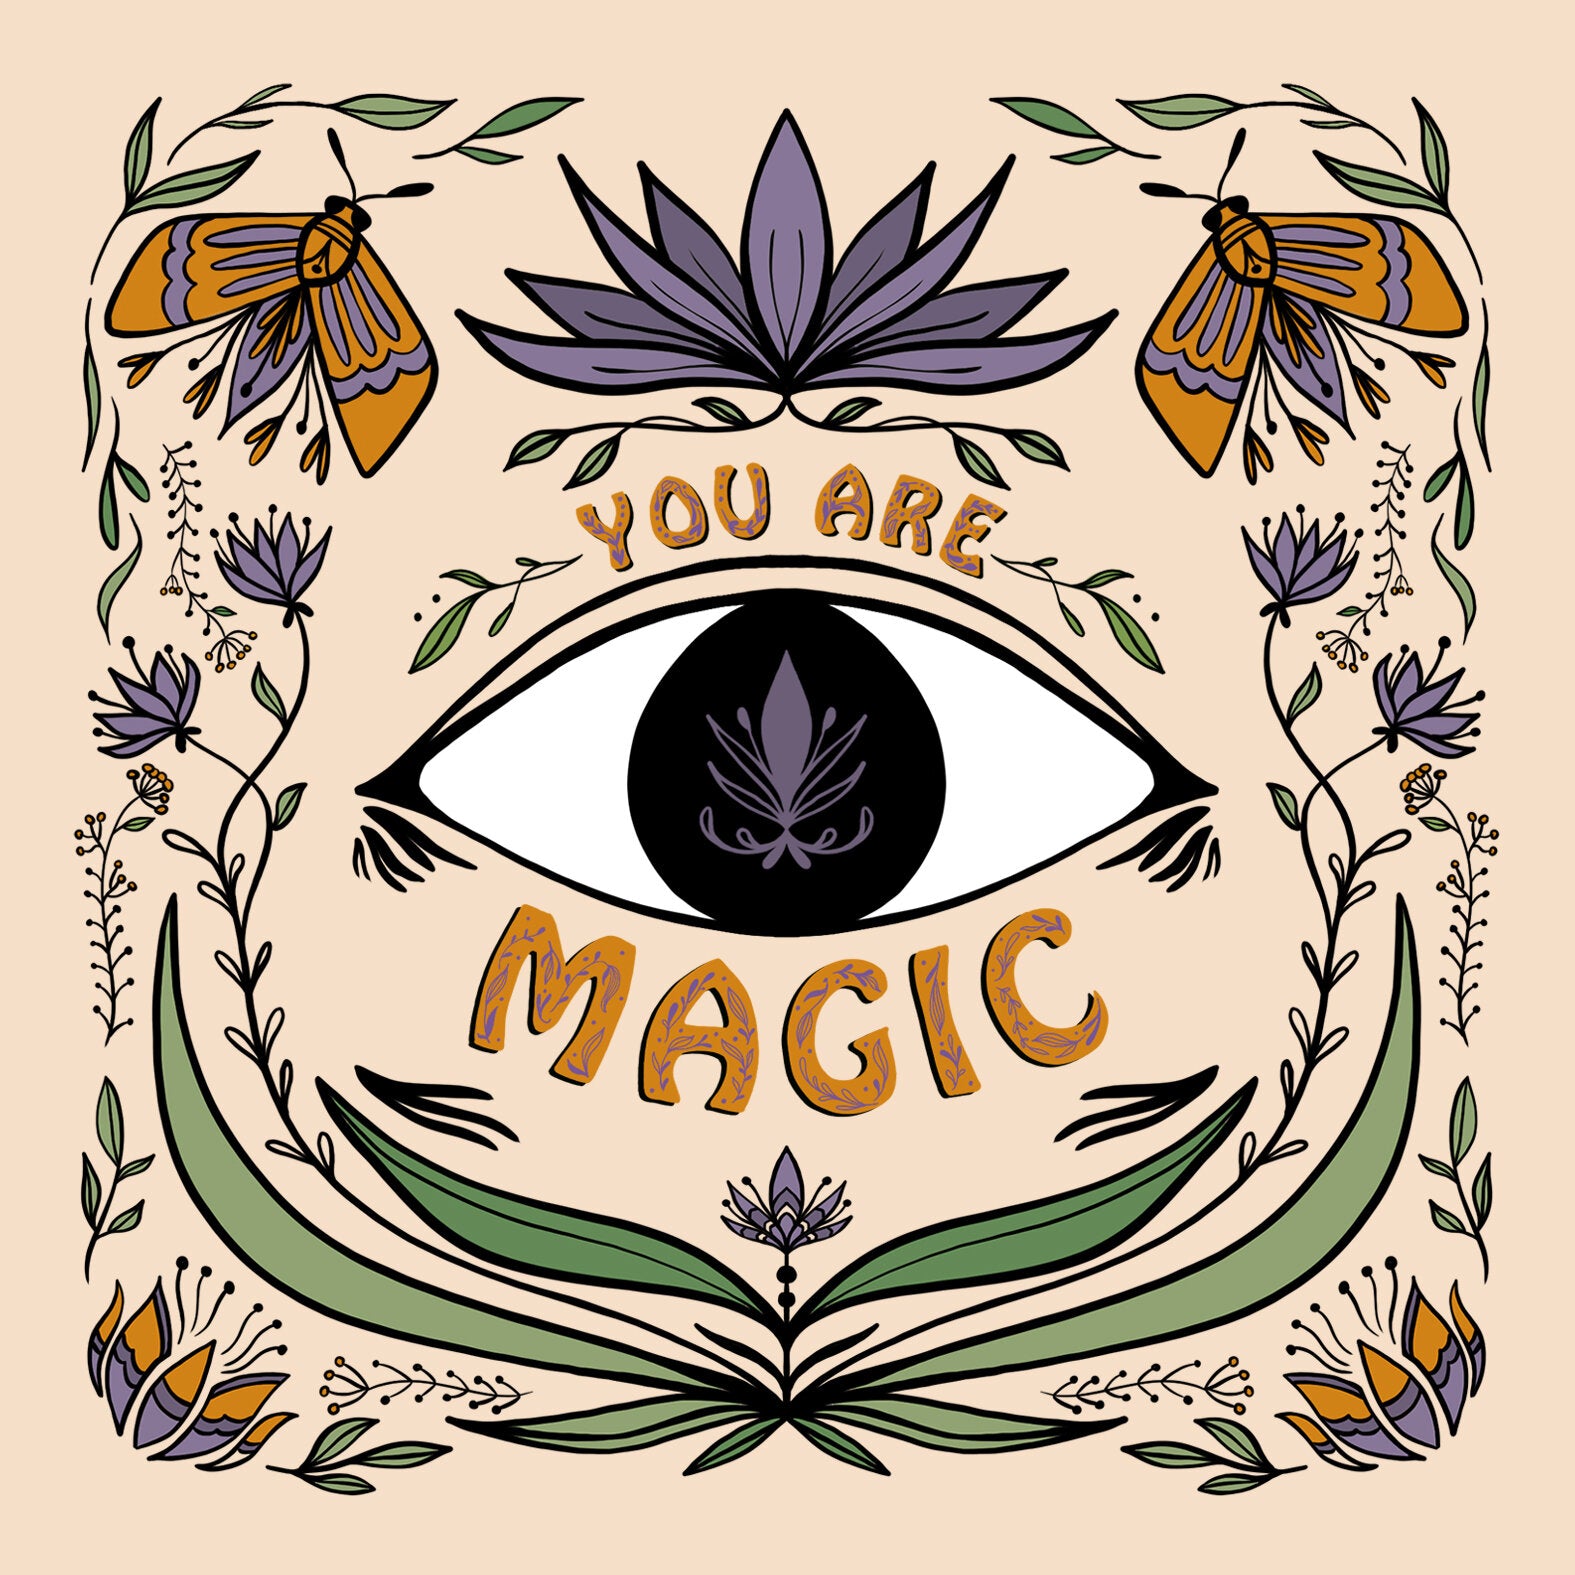 You are Magic Greeting Card